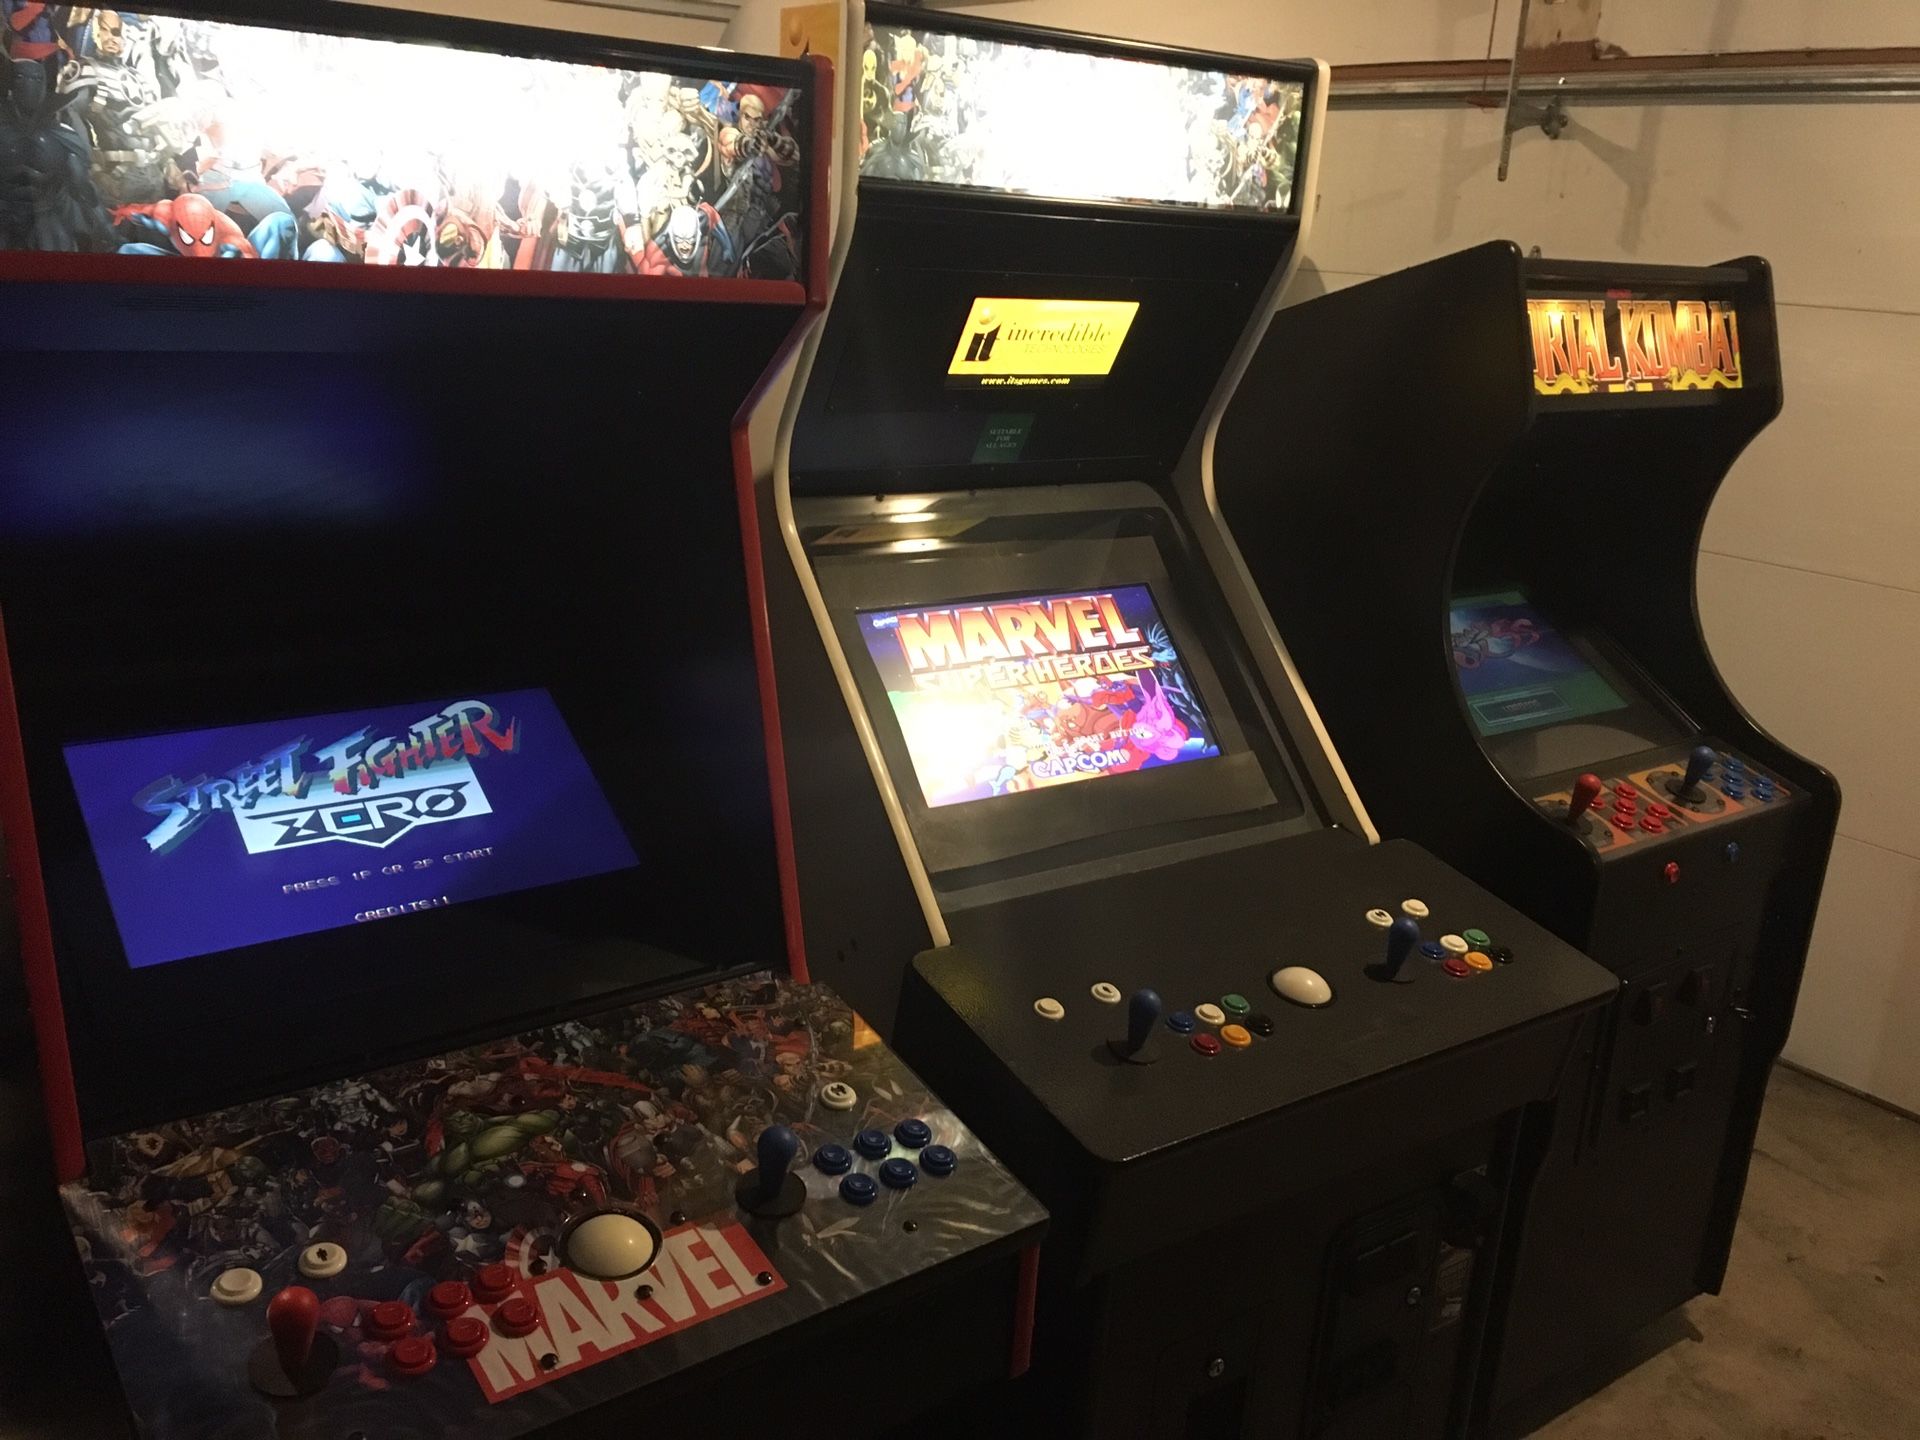 Multicade arcade games play 2222 games all the classics from the 80s and 90s 1 year warranty on all games